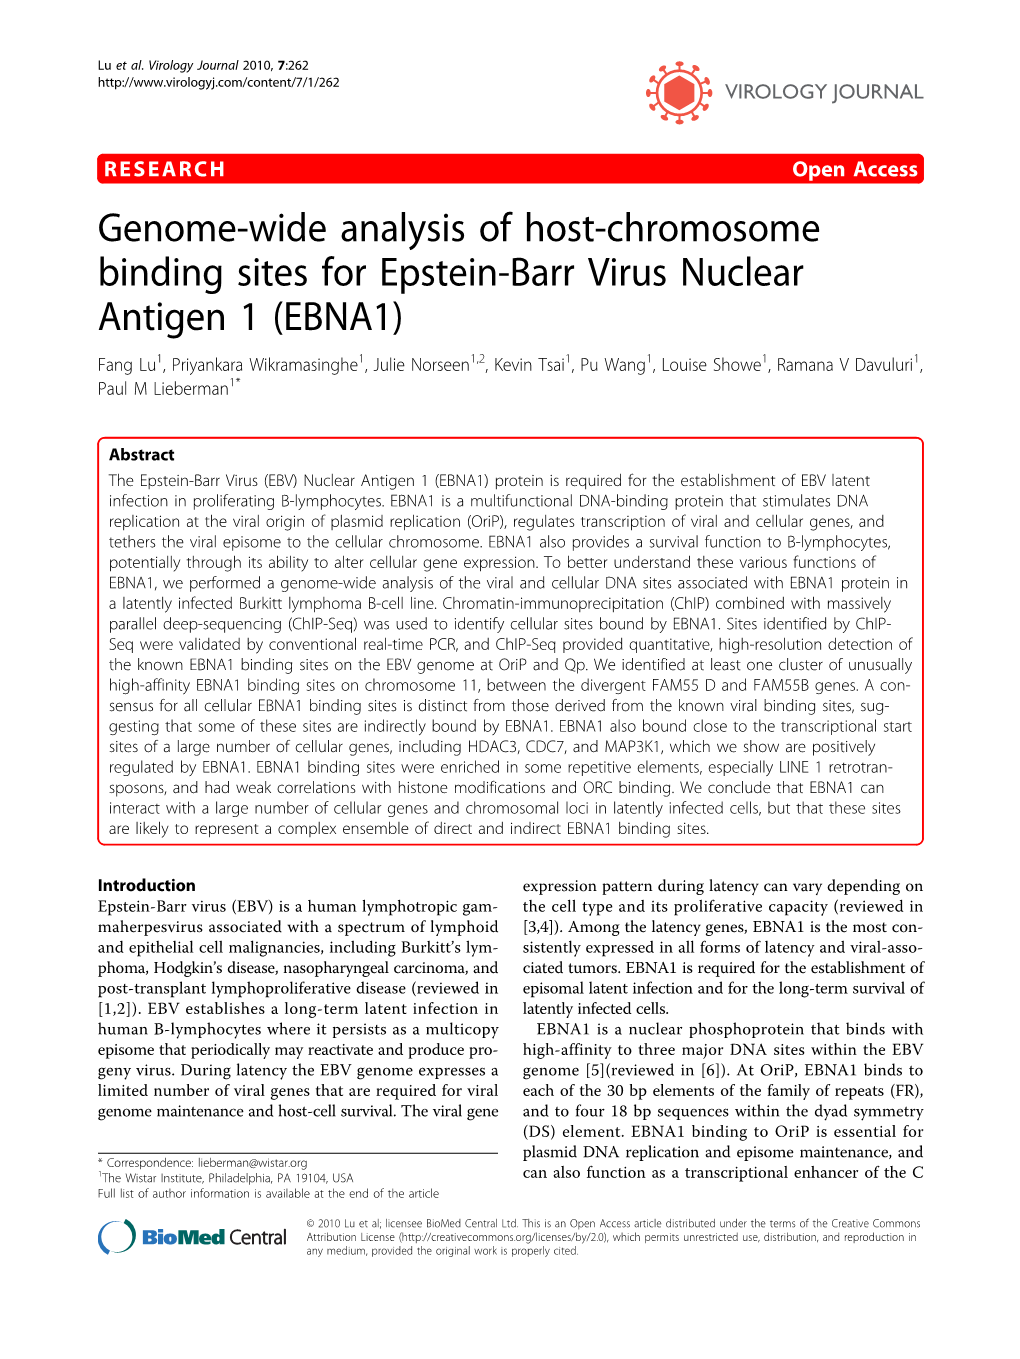 Genome-Wide Analysis of Host-Chromosome Binding Sites For